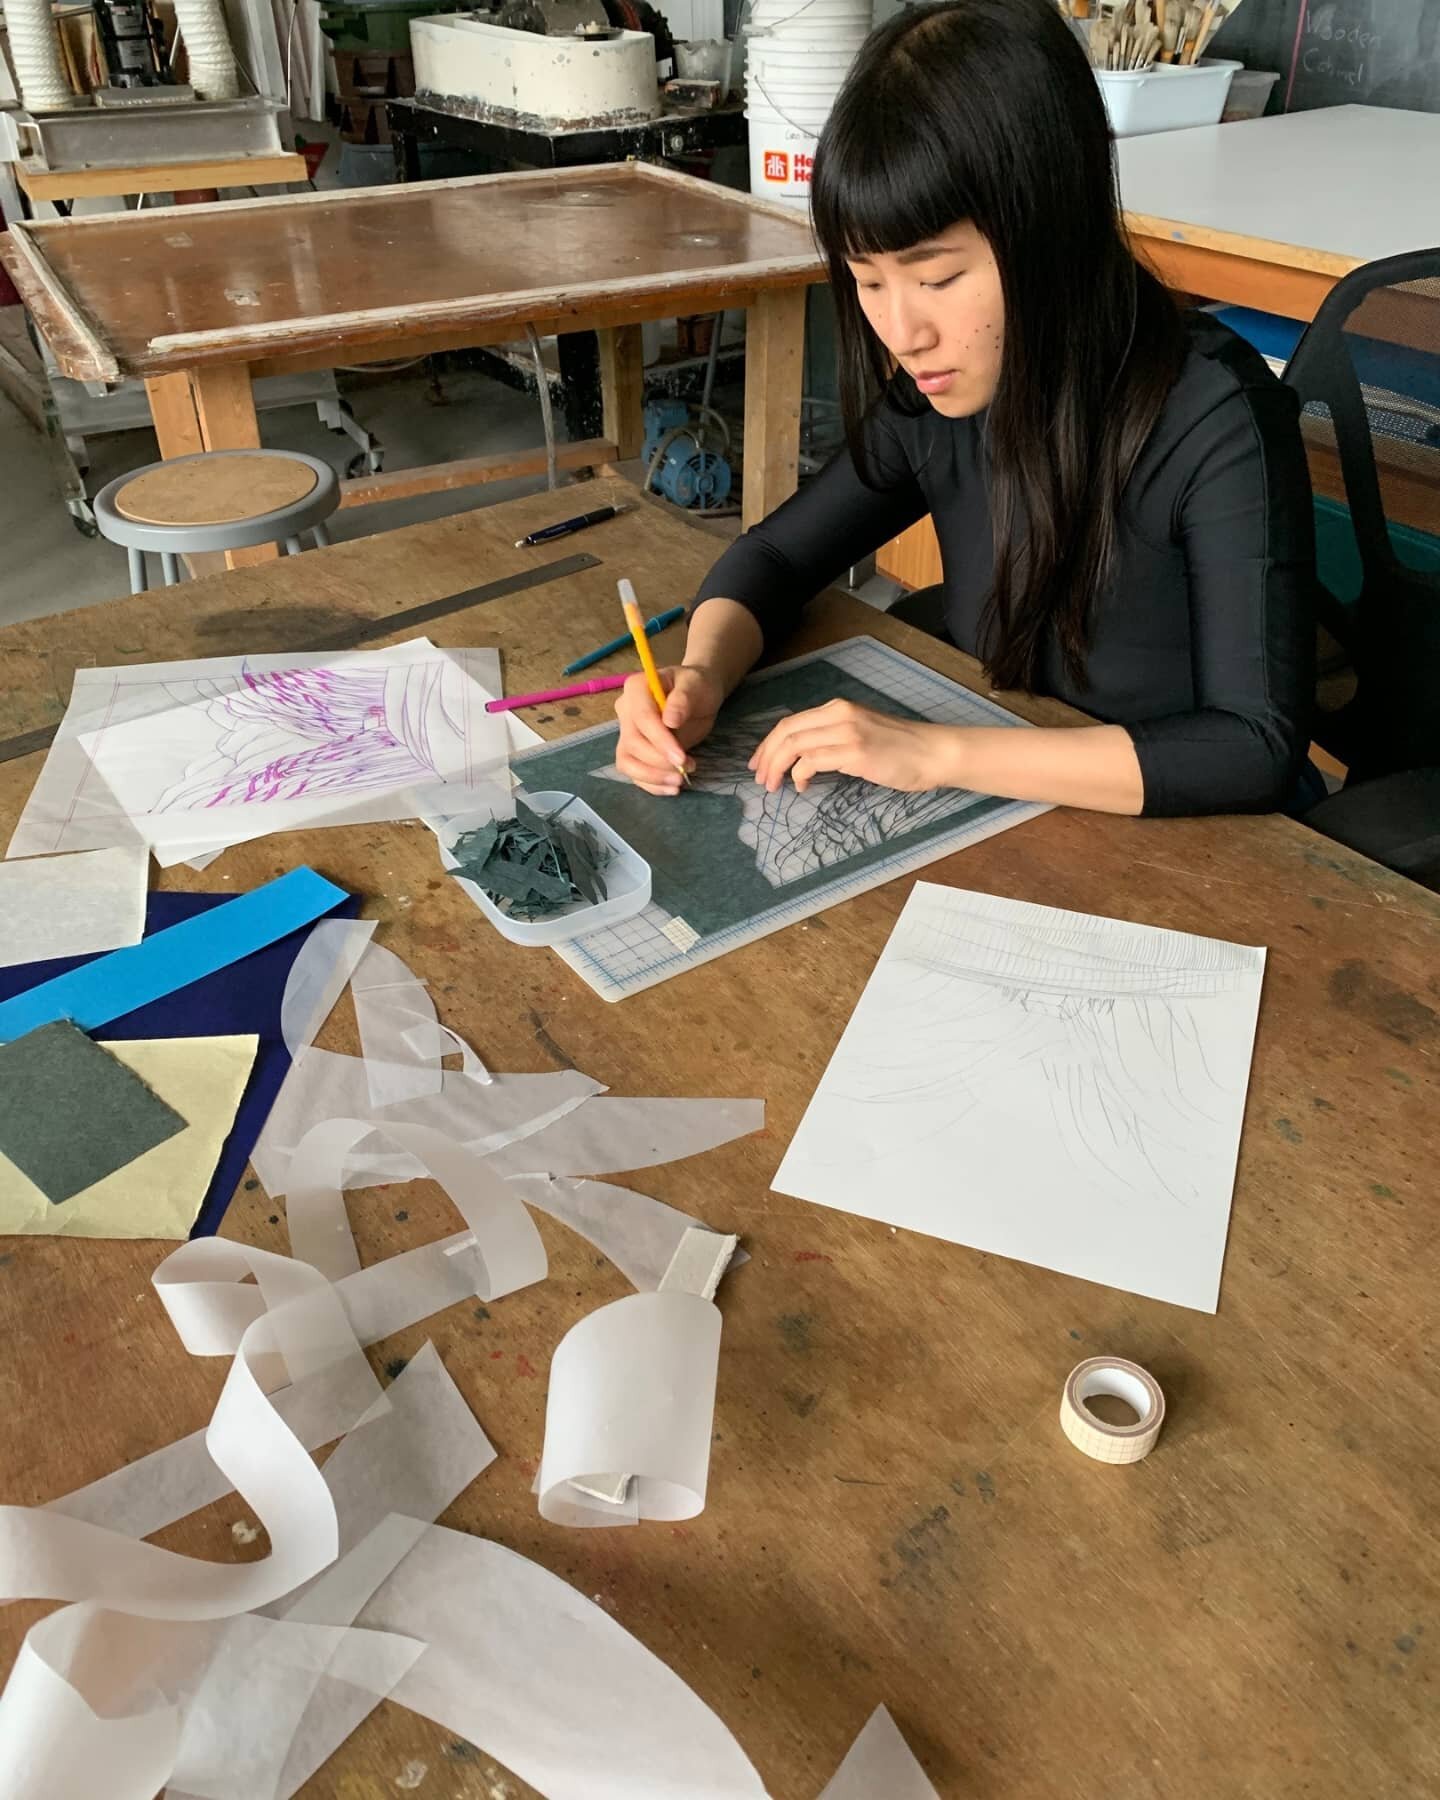 Annyen Lam is the artist behind the #PillarsofChange work Water Management - and today we bring you a peek inside her studio! She is also the creator of Tiny Blades Project, an ongoing series of small paper-cut works - which is also home to pins, pat